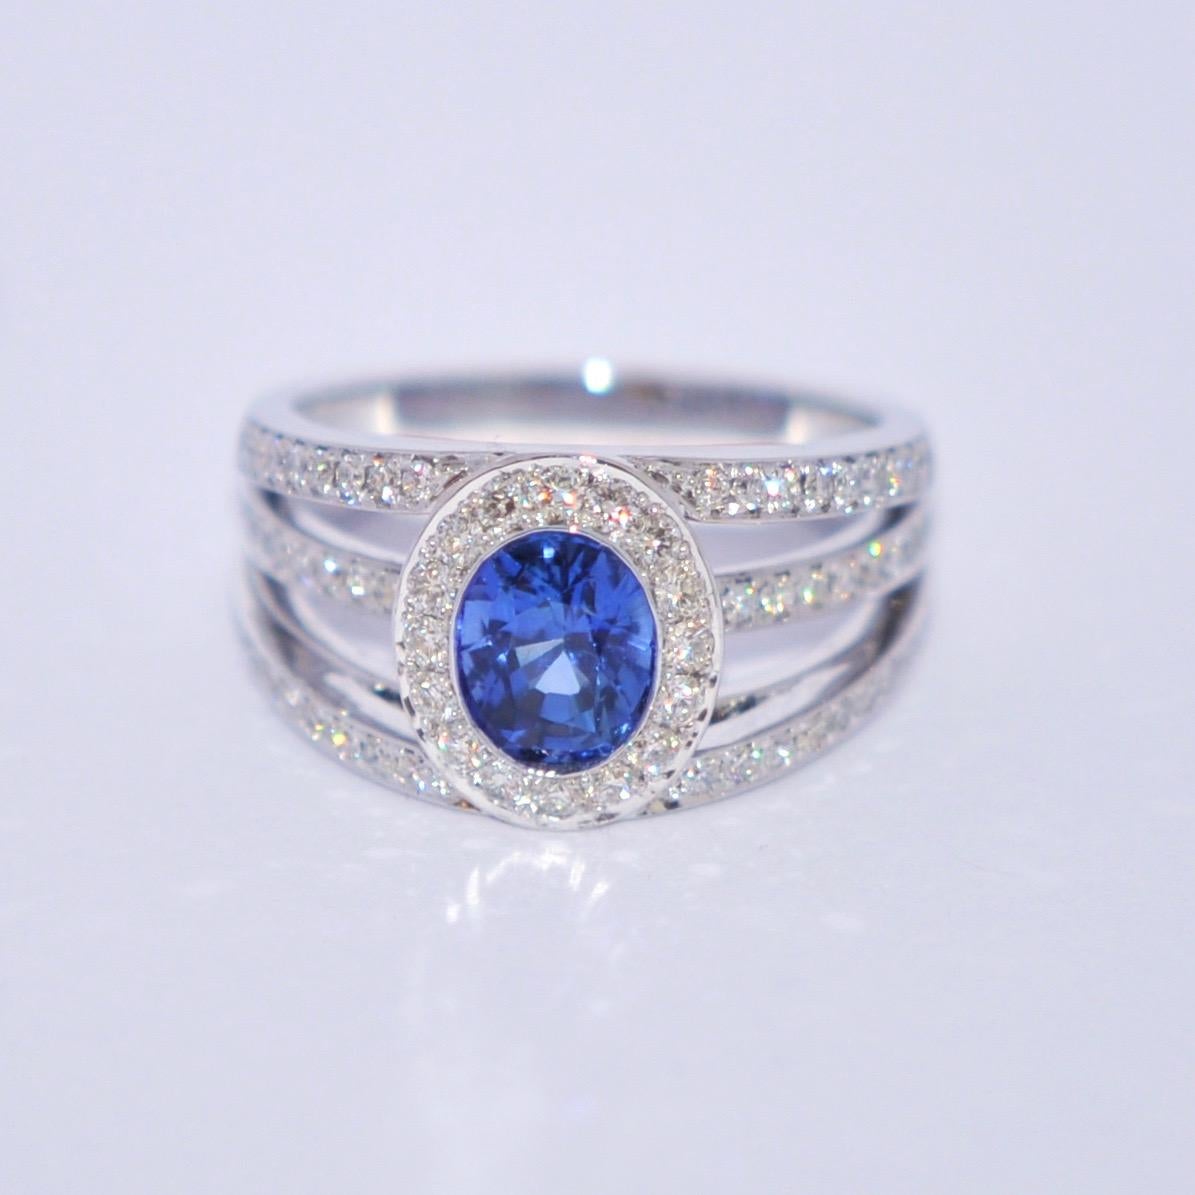 Discover this Sapphire and White Diamonds on White Gold 18 Karat Engagement Ring.
Blue Sapphire 1.55 Karat
66 White Diamonds 0.45 Karat Color G
16 White Diamonds 0.28 Karat Color G
White Gold 18 Karat
French Size 54
US Size 6 1/2
